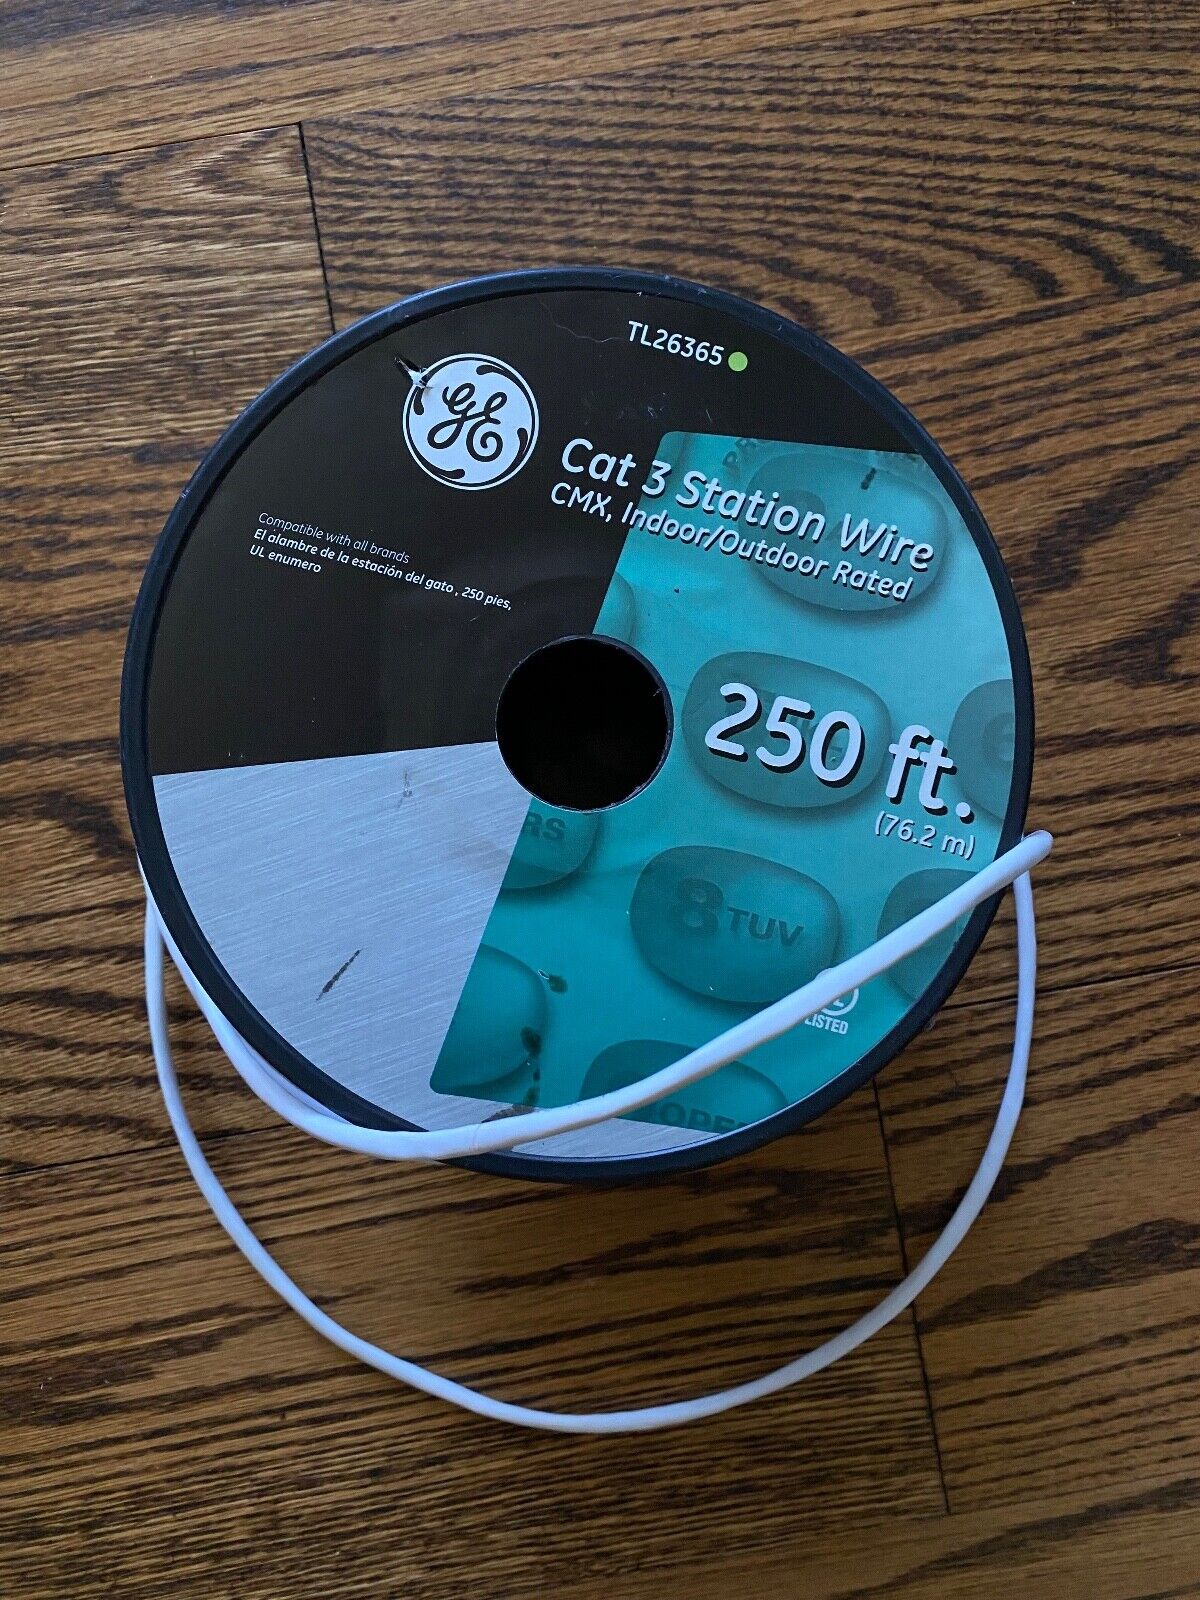 General Electric Cat 3 Station Wire TL26365 CMX Indoor/Outdoor ~200FT 4-Wire